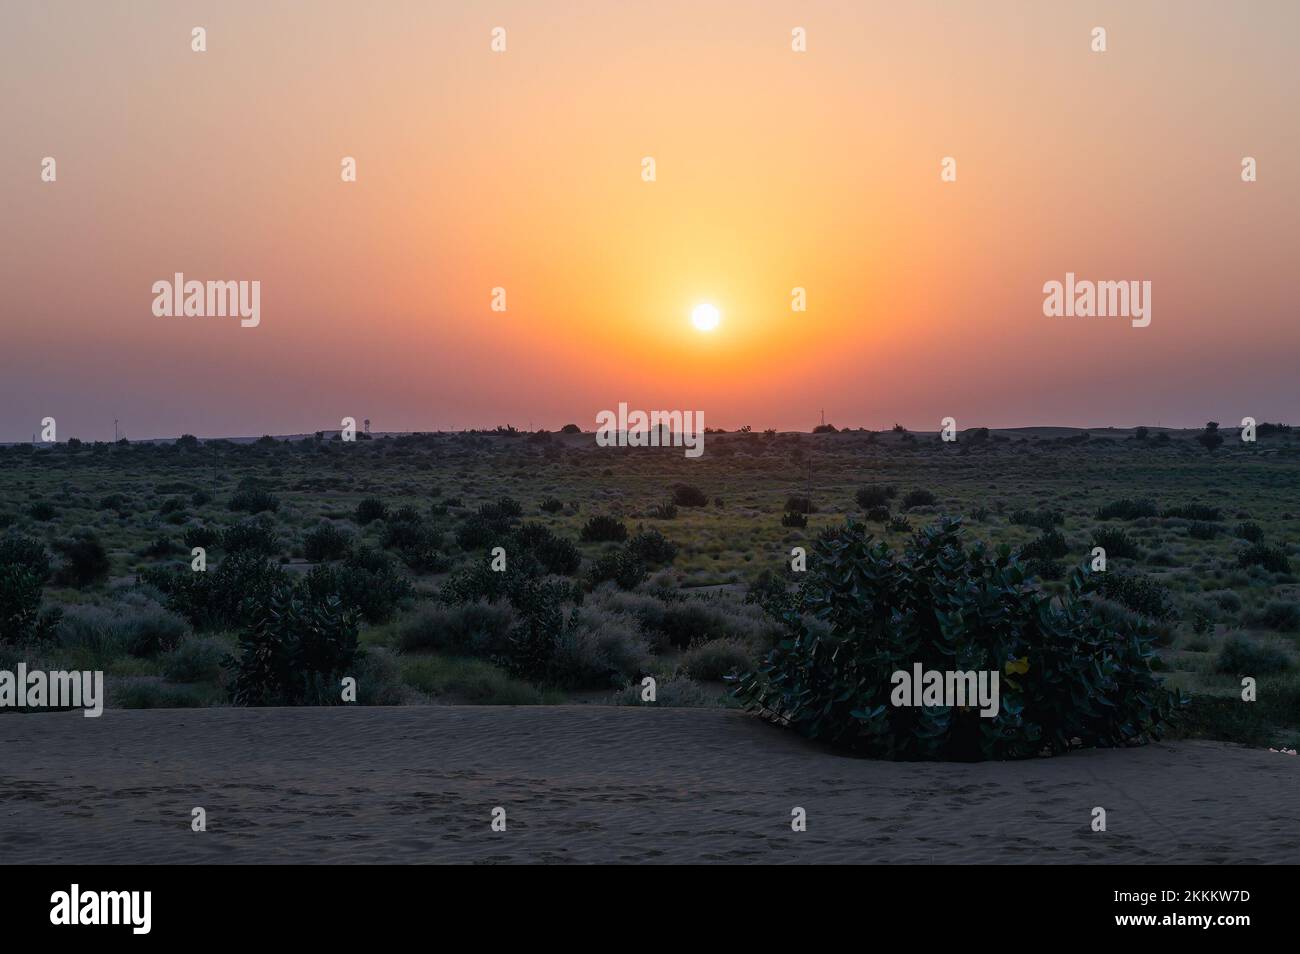 Sun rising at the horizon of Thar desert, Rajasthan, India. Tourists from across India visits to watch desert sun rise at Thar desert. Stock Photo